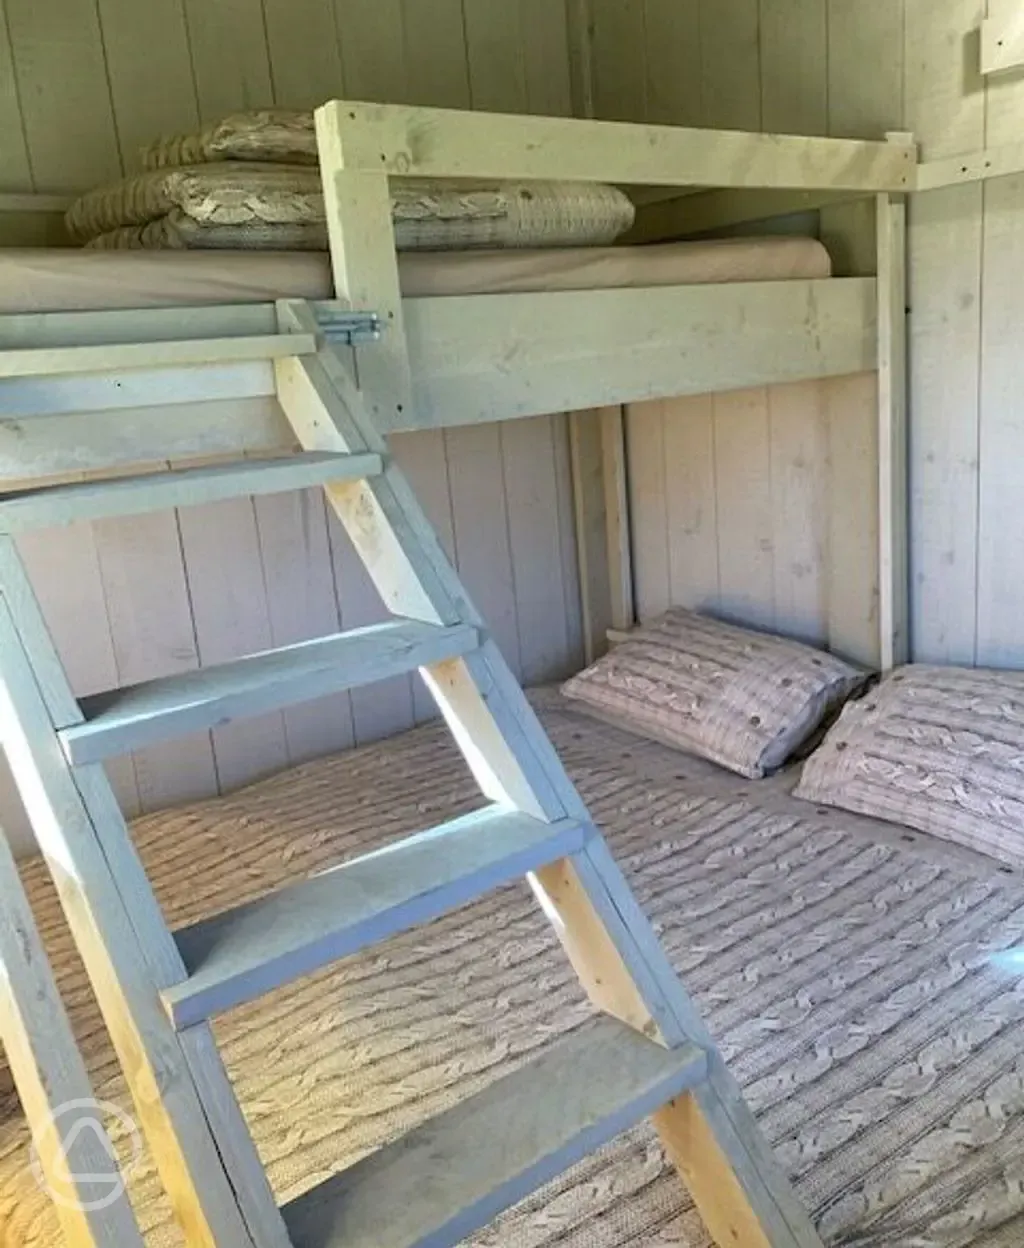 Bunk beds in the safari tents